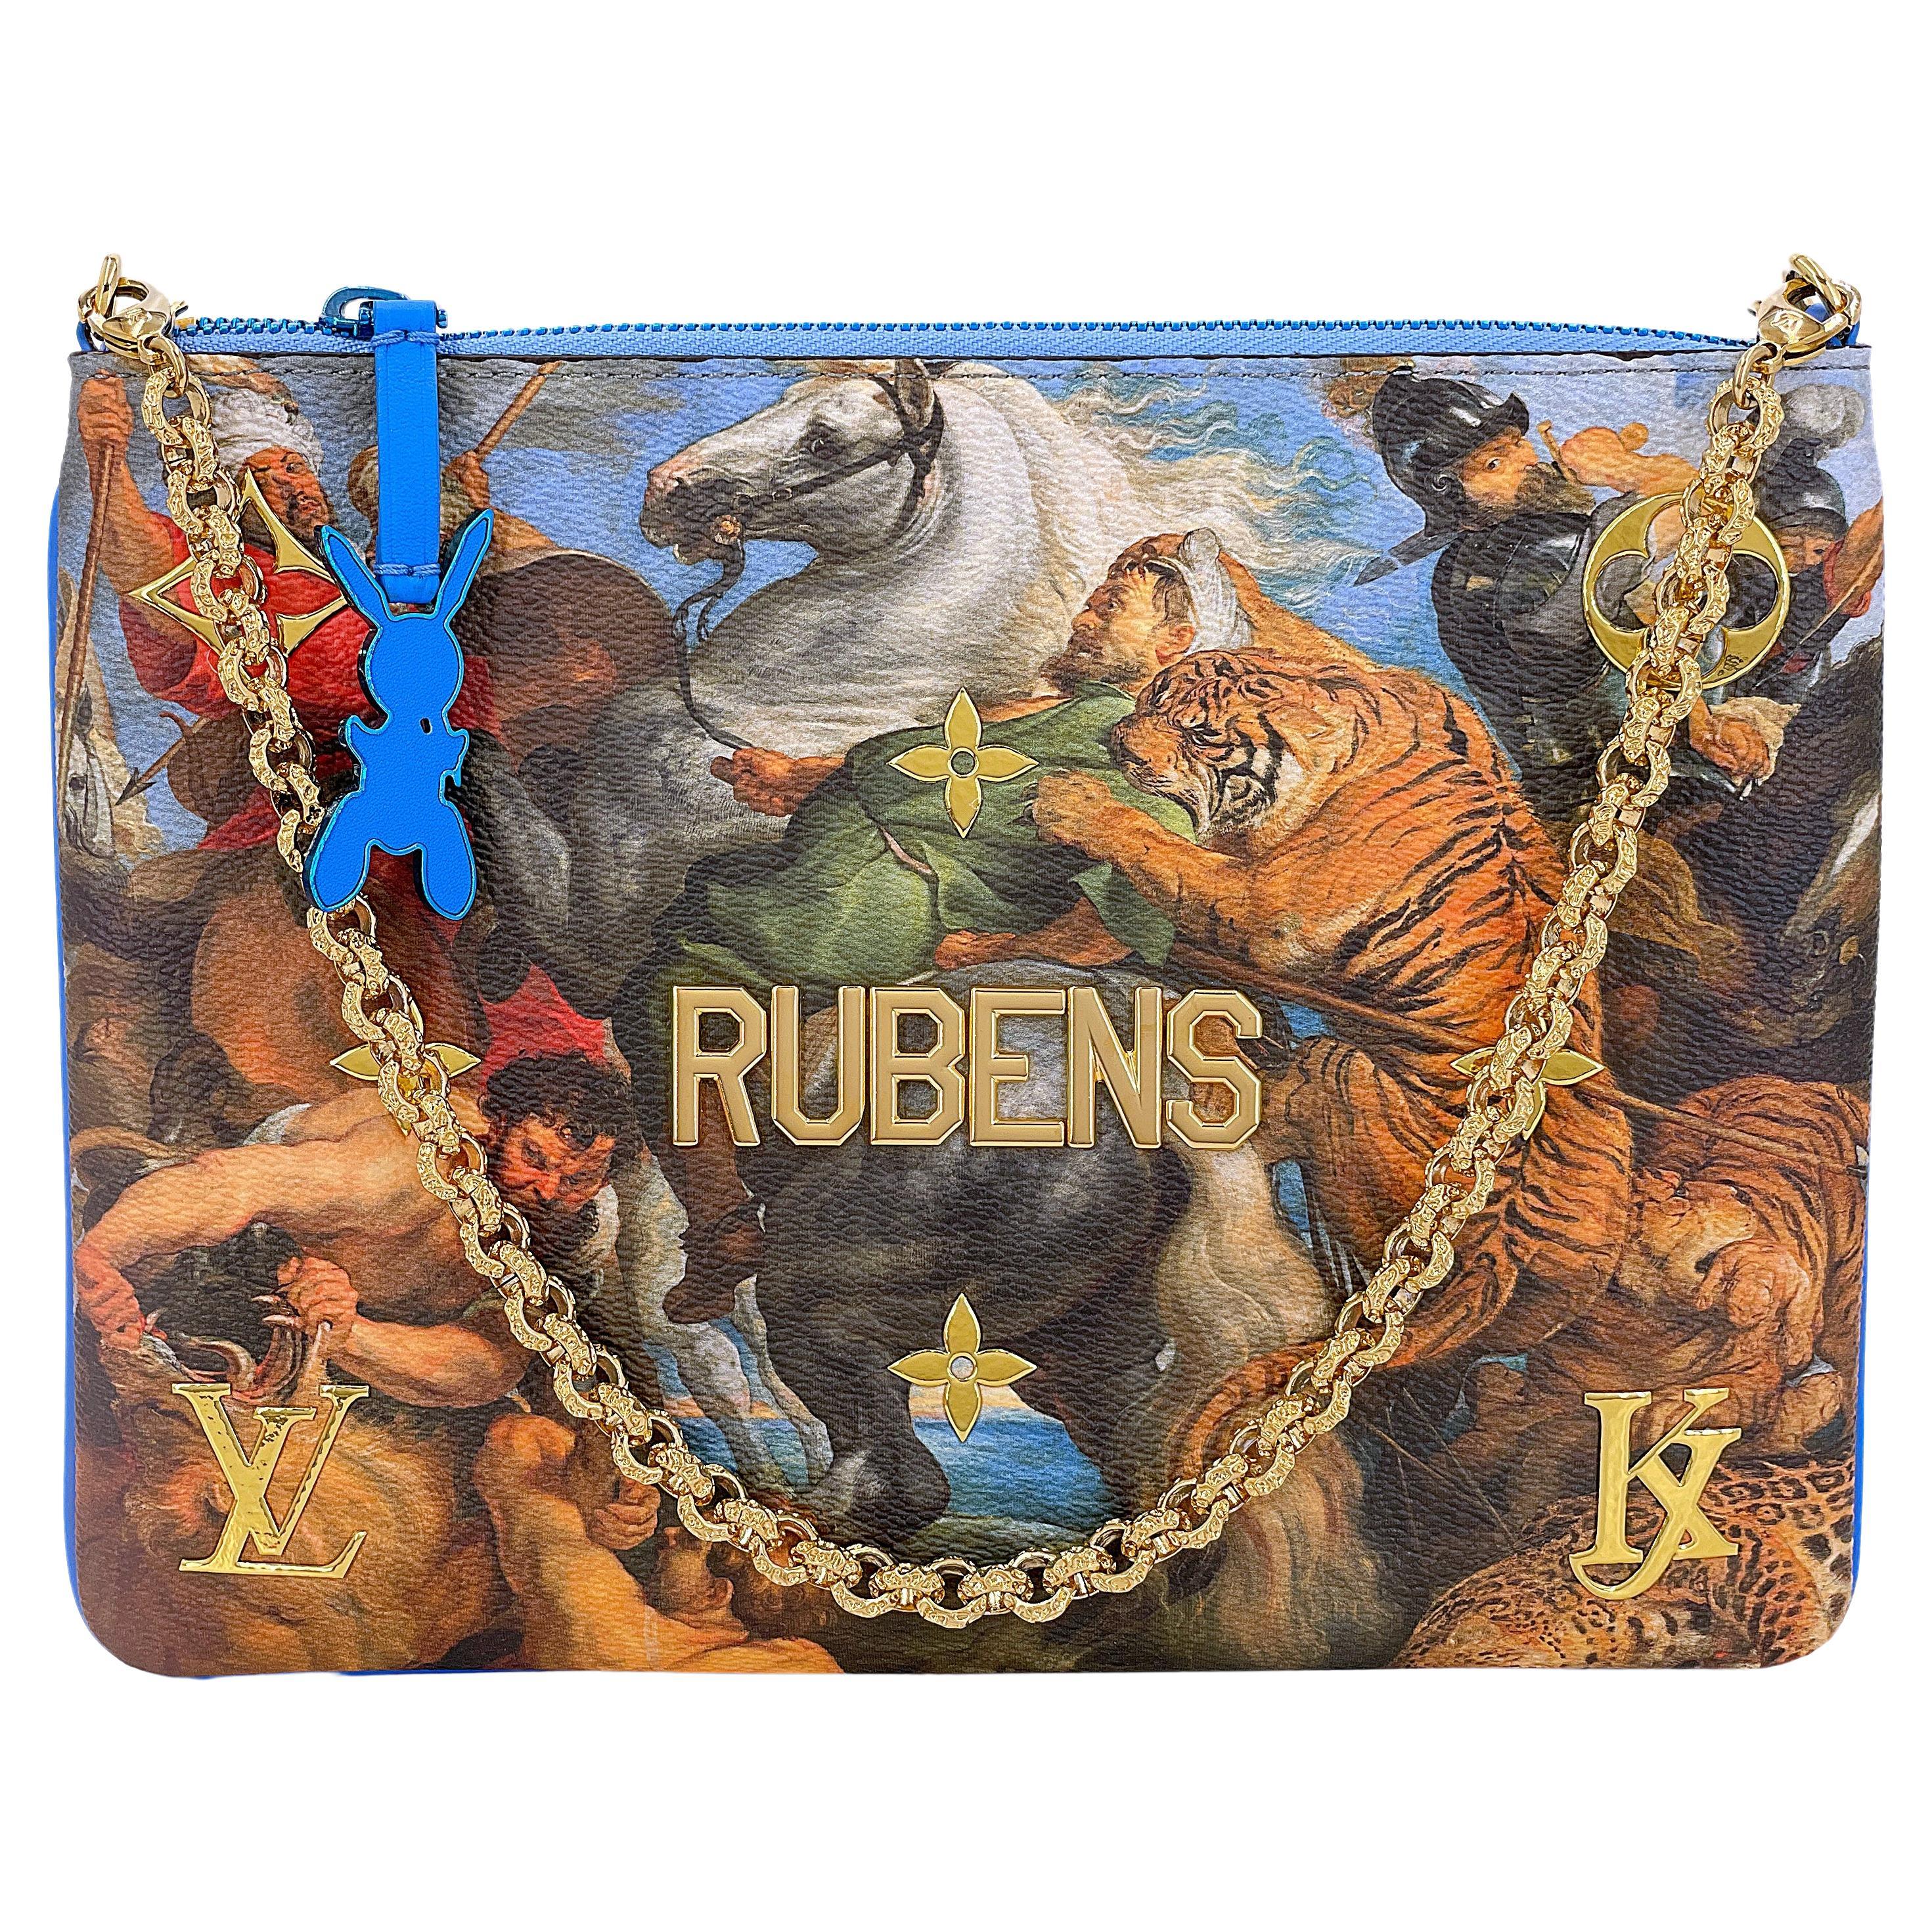 Louis Vuitton x Jeff Koons Rubens "Masters" Clutch with Chain 66854 For Sale